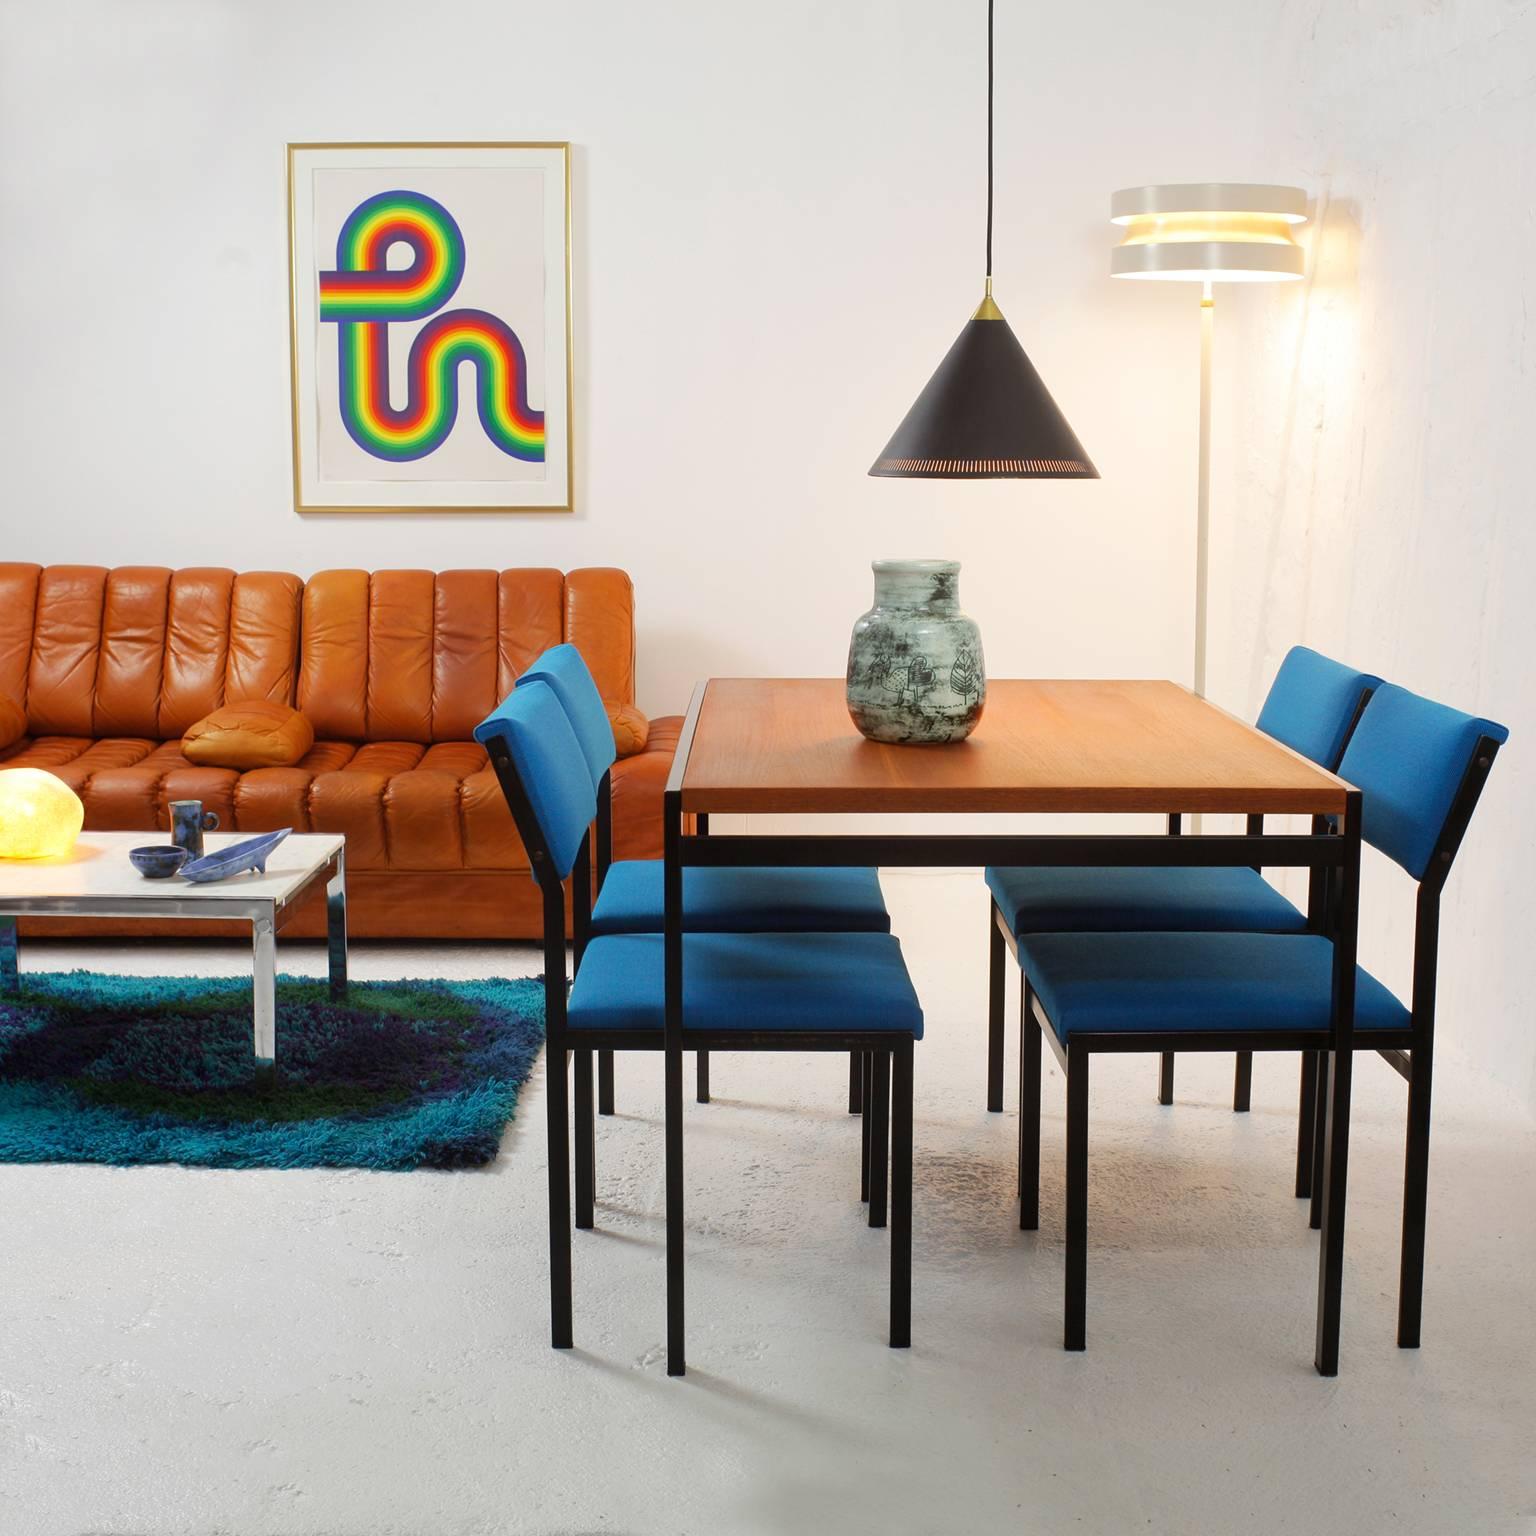 Set of four Cees Braakman Japanese serie dining chairs for Pastoe.
New bright blue Kvadrat upholstery.
Enameled black metal frames in original condition with some wear consistent with age and use.
Stamp Pastoe on each chair.